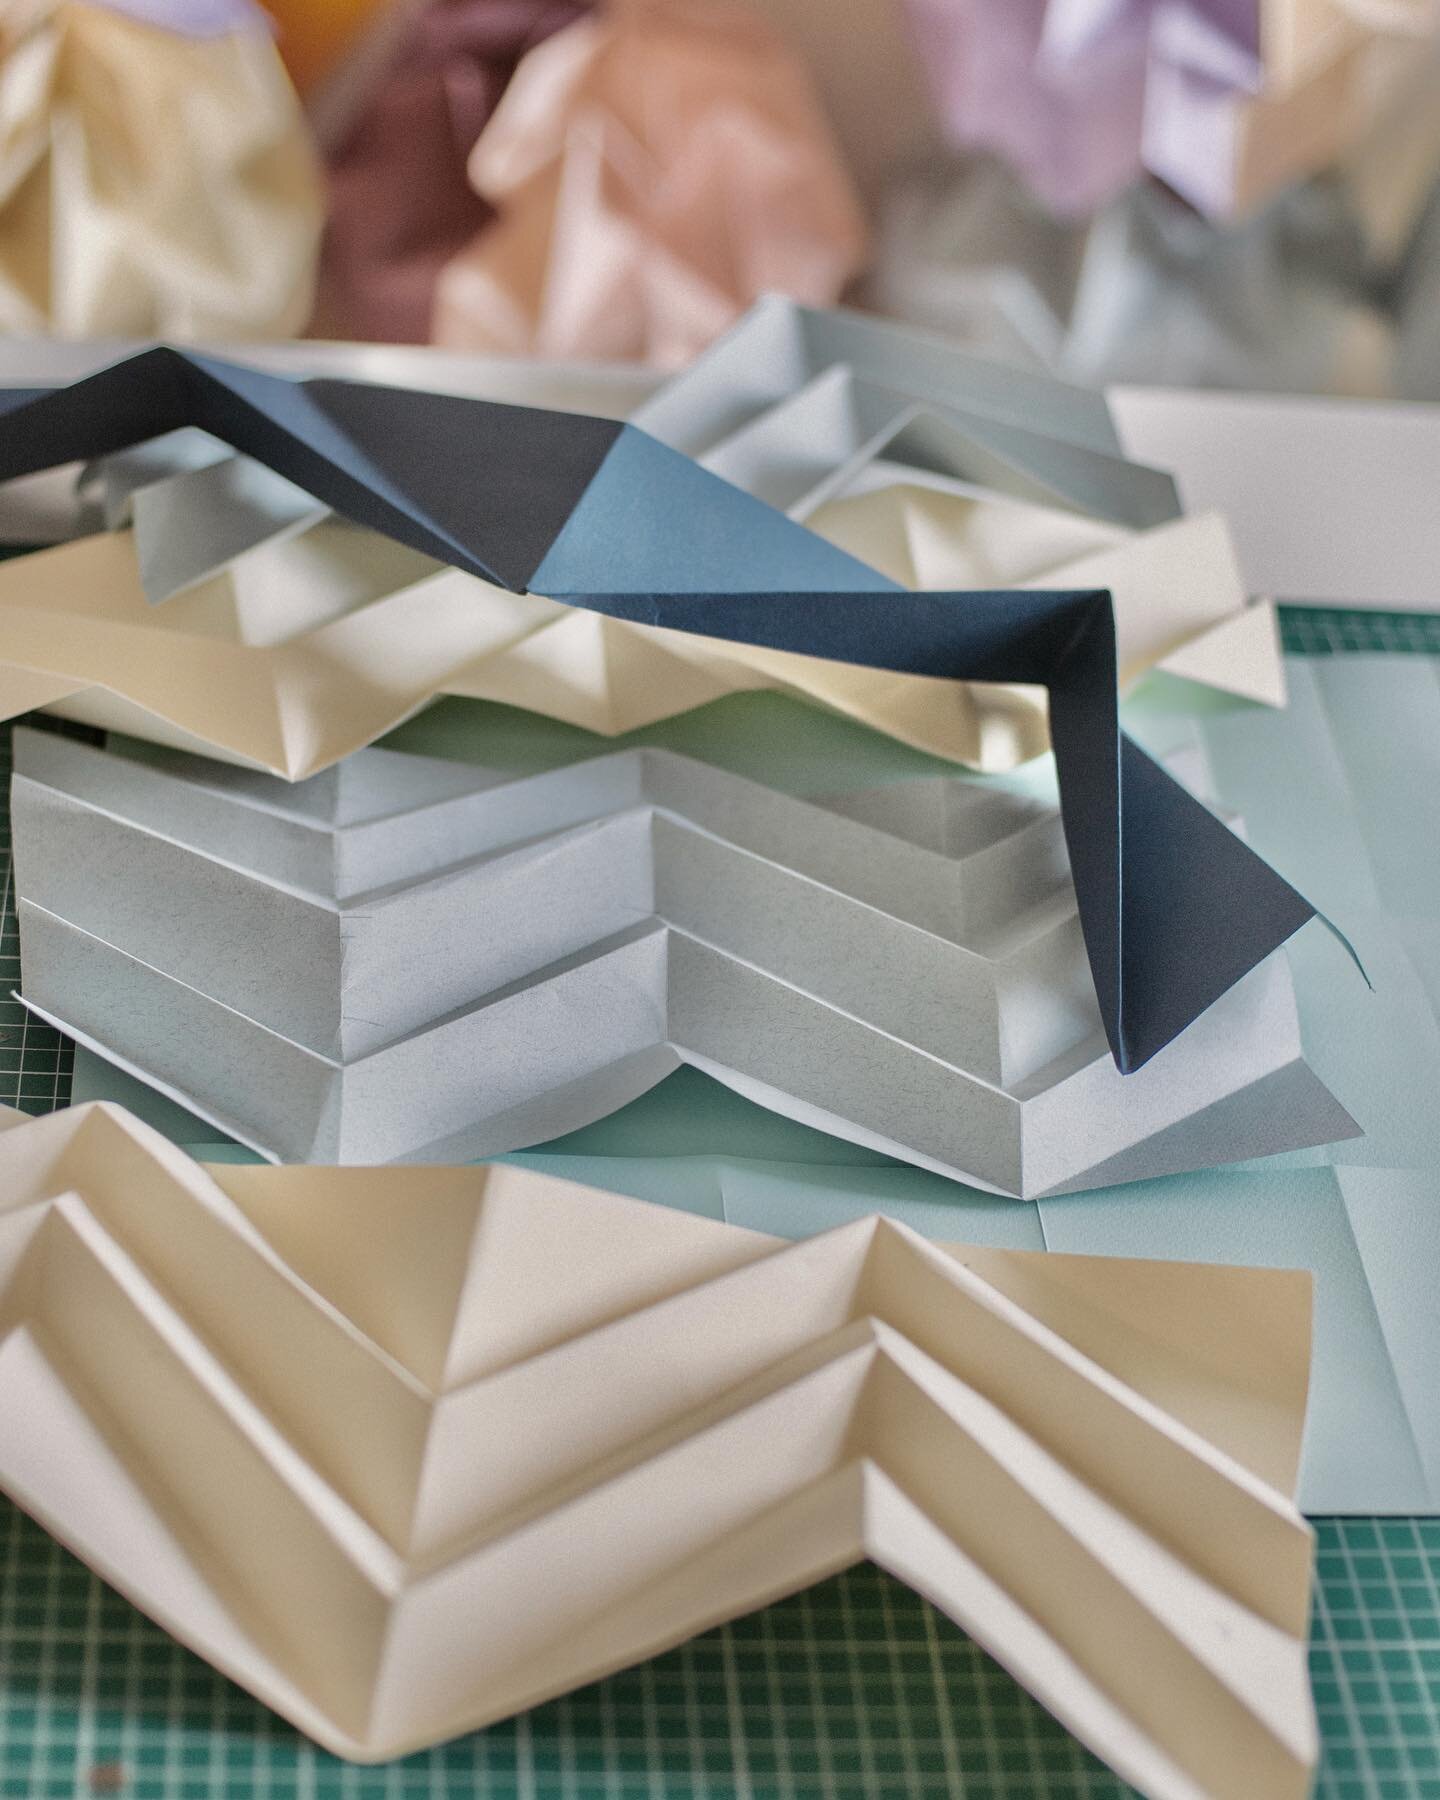 The everyday view of sample folds on my studio desk 
.
.
#practicemakesprogress #samples #folded #fold #paper #foldedpaper #origami #papercraft #papercrafts #workingwithcolour #workingwithpaper #craft #design #madebyhand